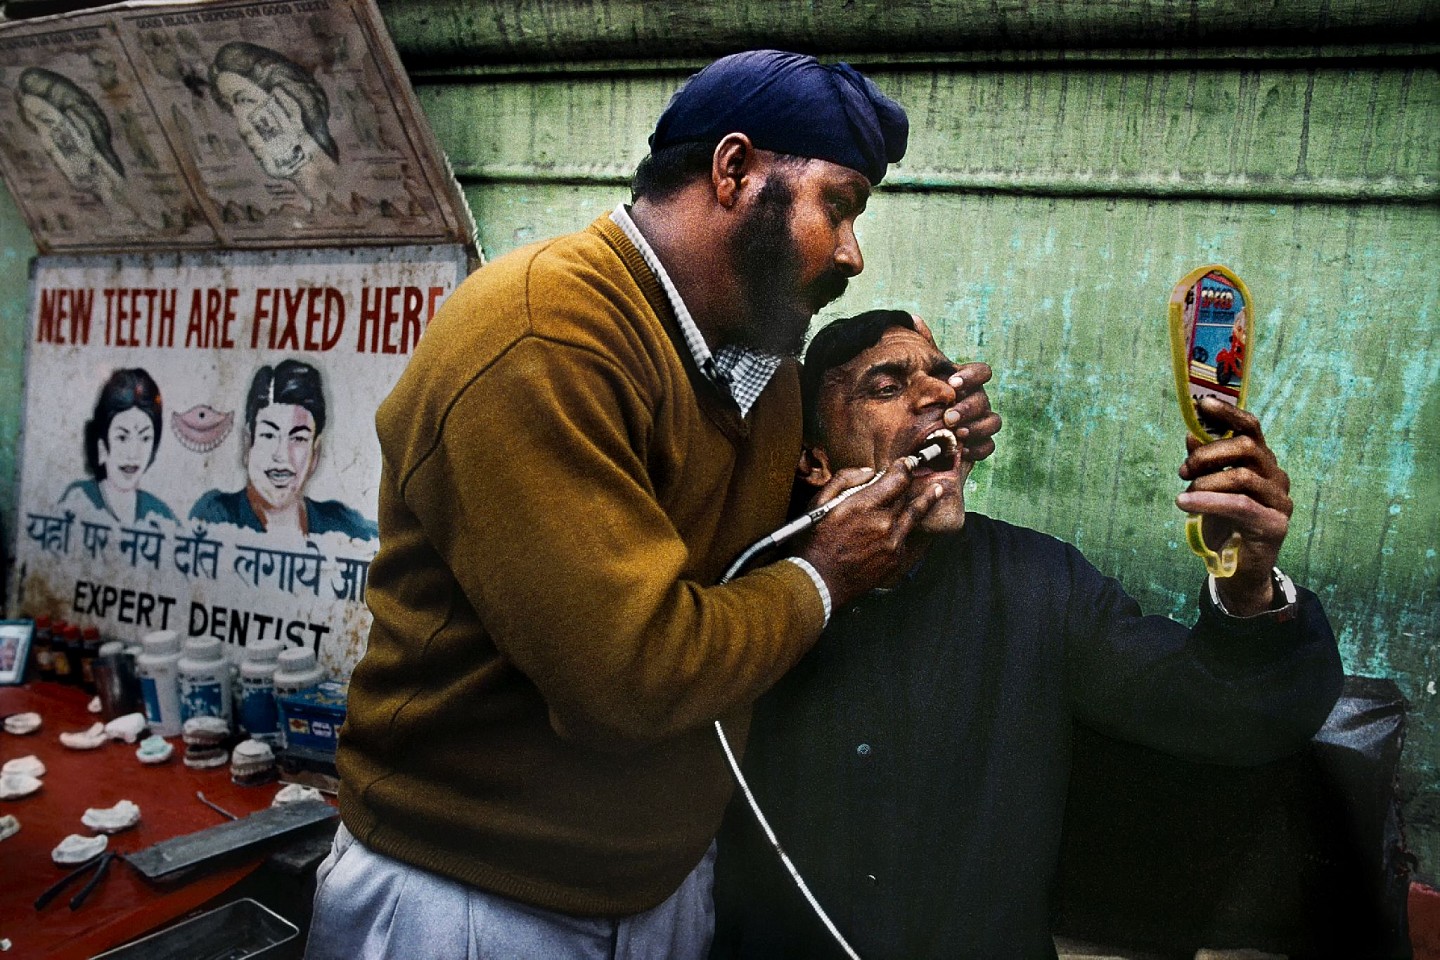 Steve McCurry, Street Dentist, 1998
FujiFlex Crystal Archive Print
Price/Size on request